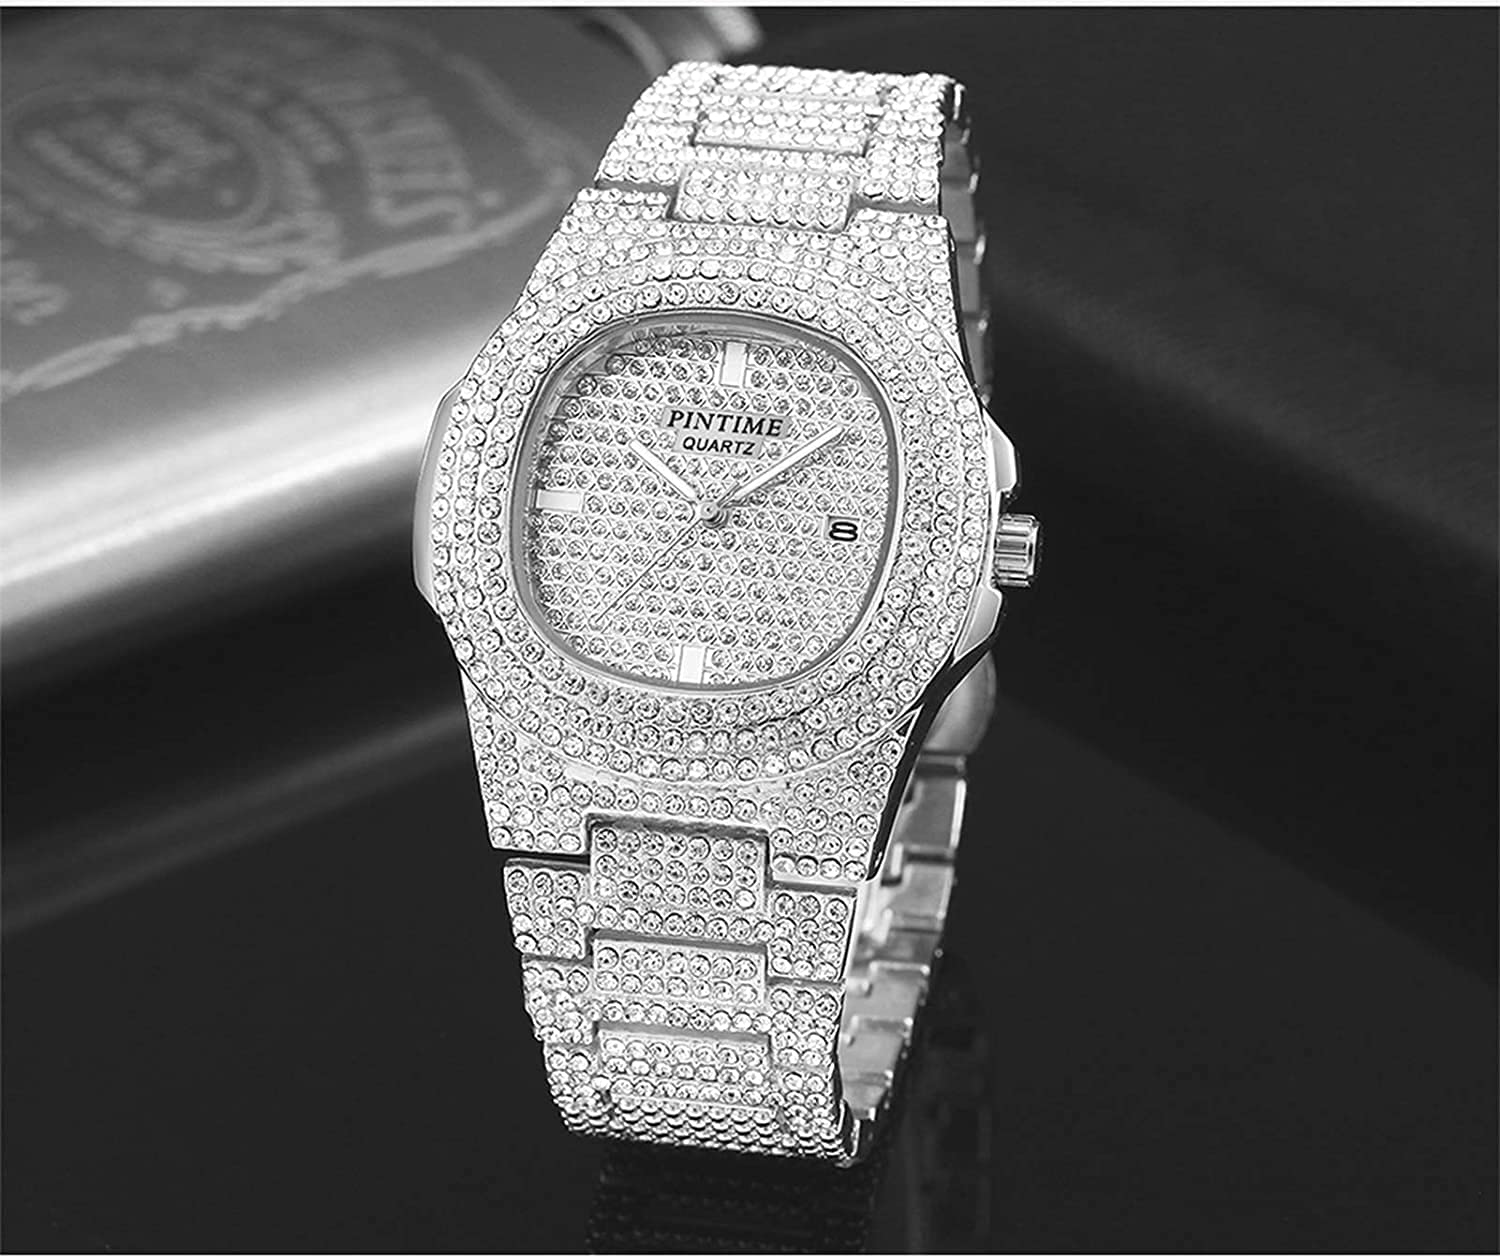 BESTKANG Fashion Unisex Crystal Diamond Watches Mens/Womens Luxury Bling-ed Out Gold Silver Stainless Steel Quartz Analog Wrist Watch